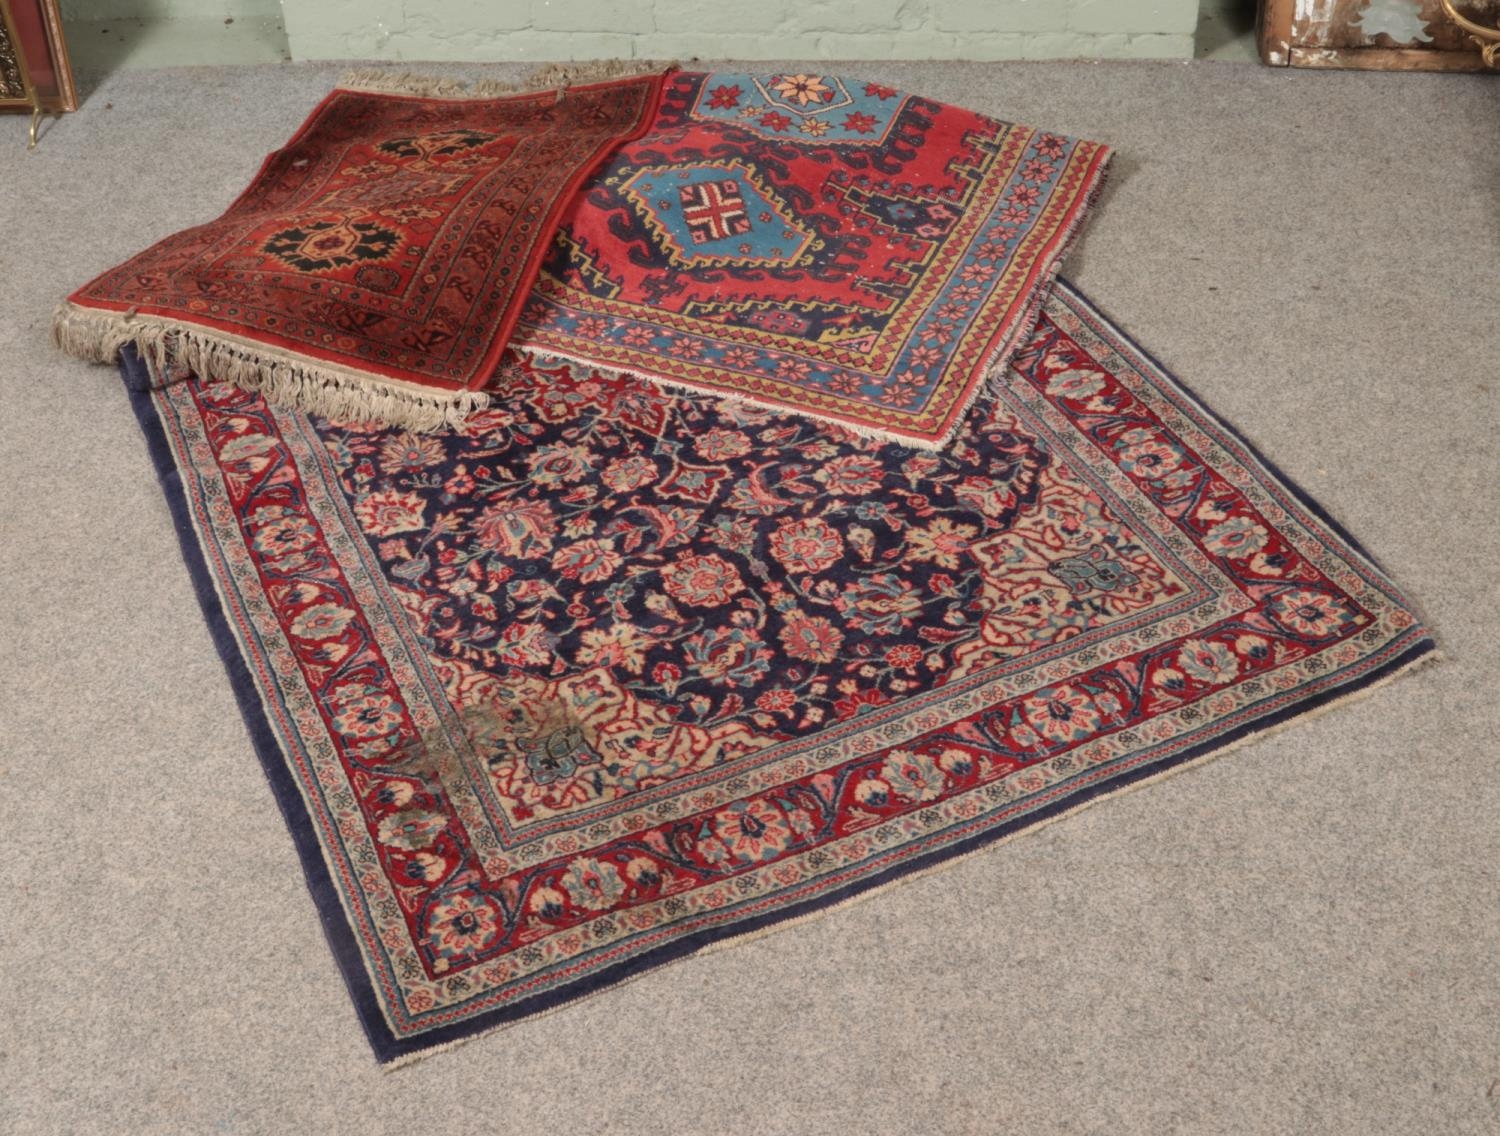 A collection three of rugs including red and blue floral design with central medallion.